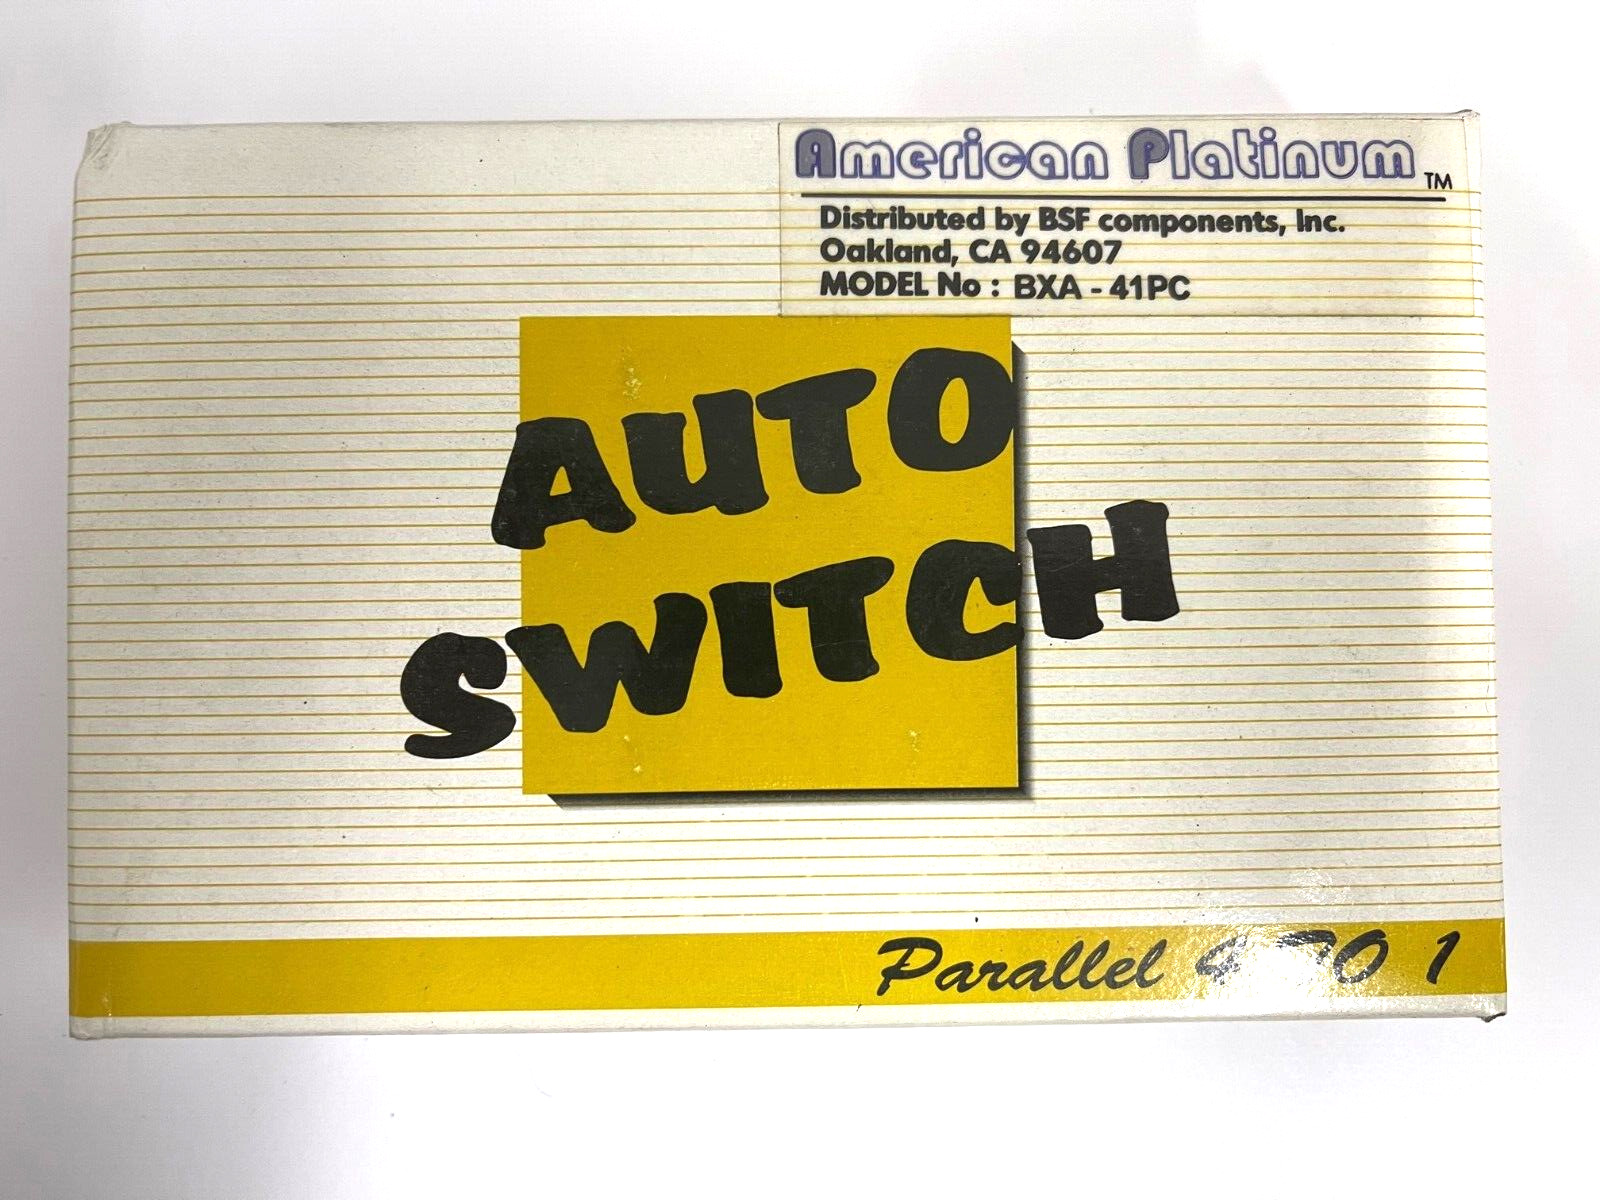 BRAND NEW VINTAGE RETAIL AMERMICAN PLATINUM PARALLEL 4 TO 1 AUTO SWITCH RM1-YRK4